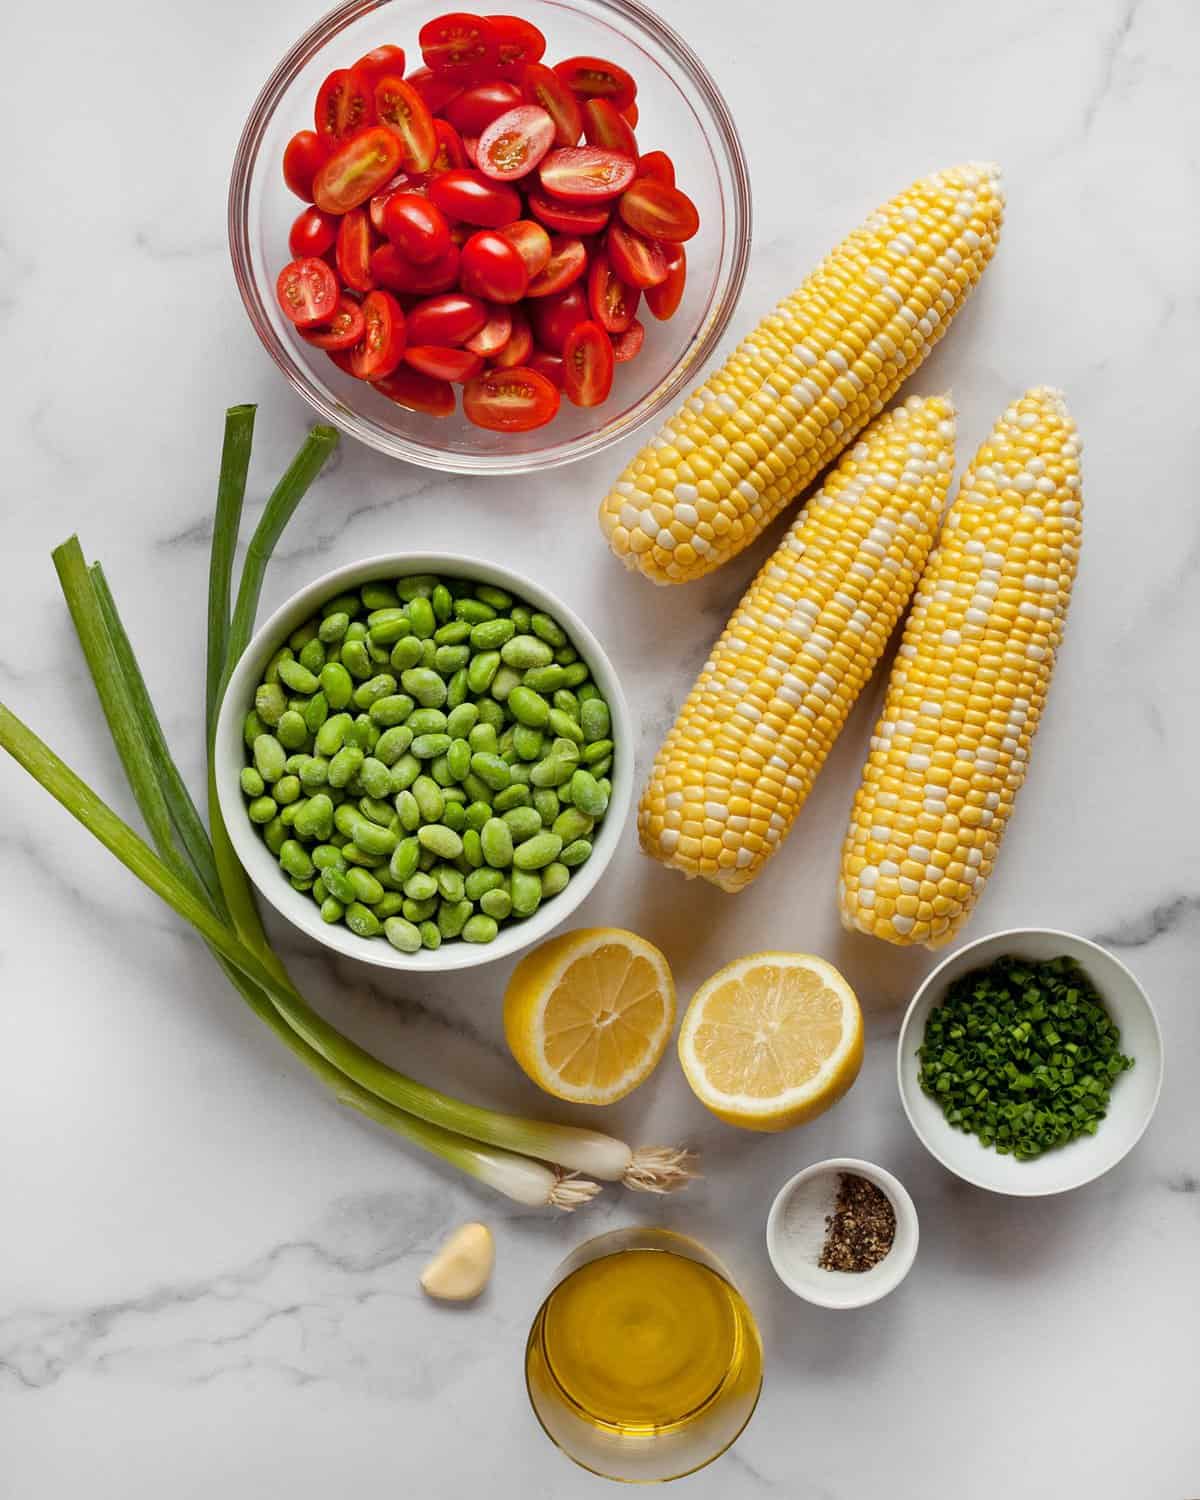 Ingredients including corn, edamame, tomatoes, scallions, lemon and chives.